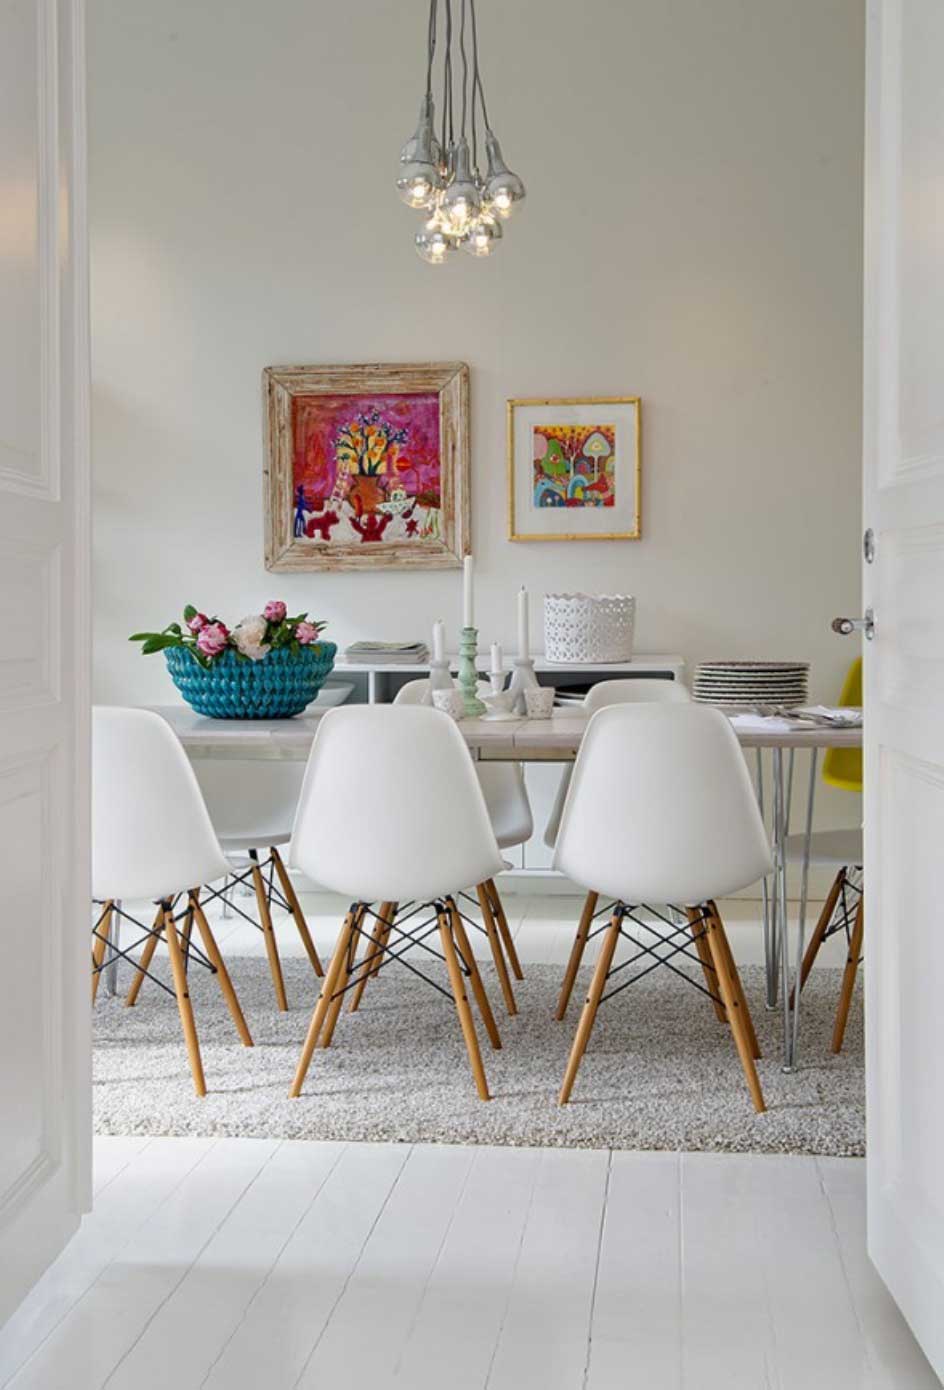 White Themed For Beautiful White Themed Dining Room For Small Houses Design With Contemporary Dining Table Idea And Adorable White Feather Carpet Design Also Lovely Hanging Lamps Ideas Dining Room The Best Simple Dining Room Ideas